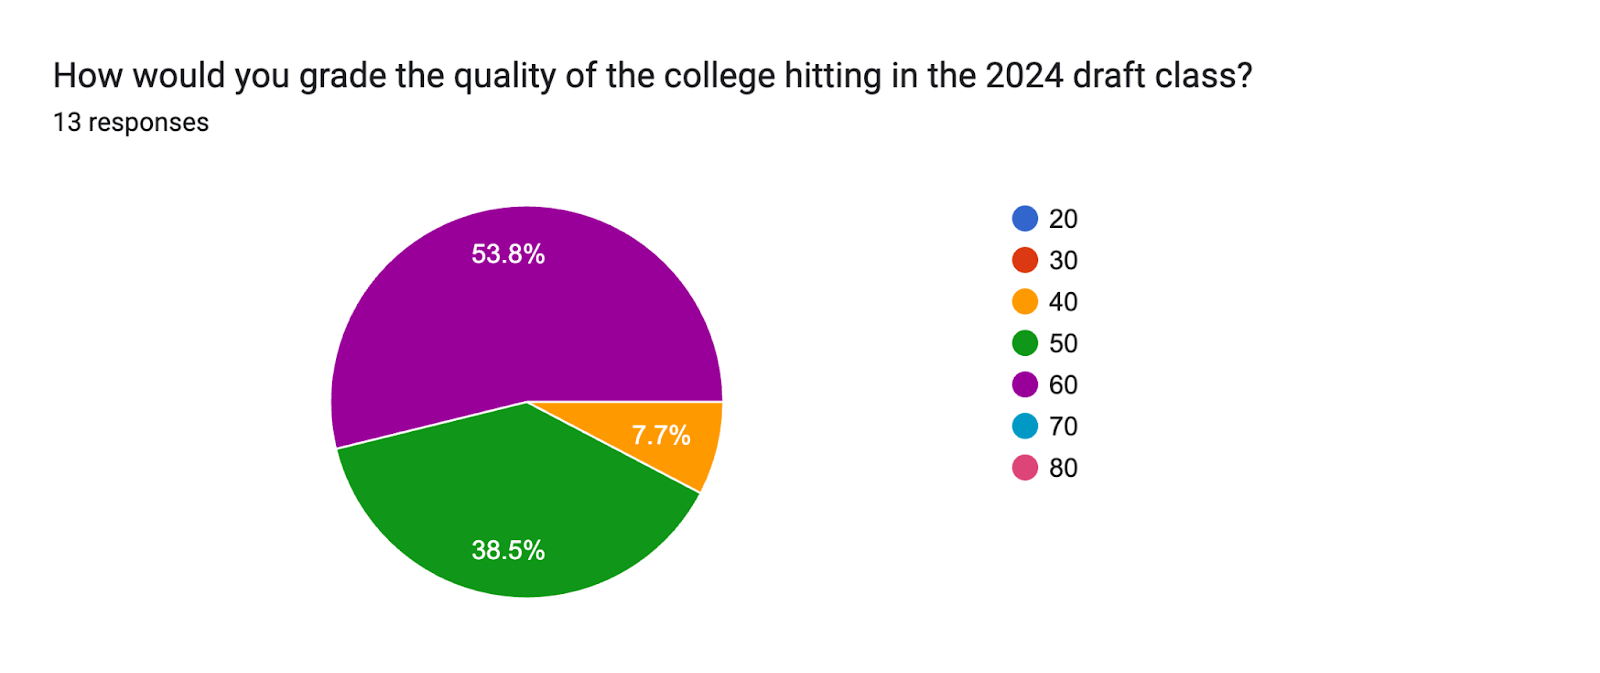 Forms response chart. Question title: How would you grade the quality of the college hitting in the 2024 draft class?. Number of responses: 13 responses.